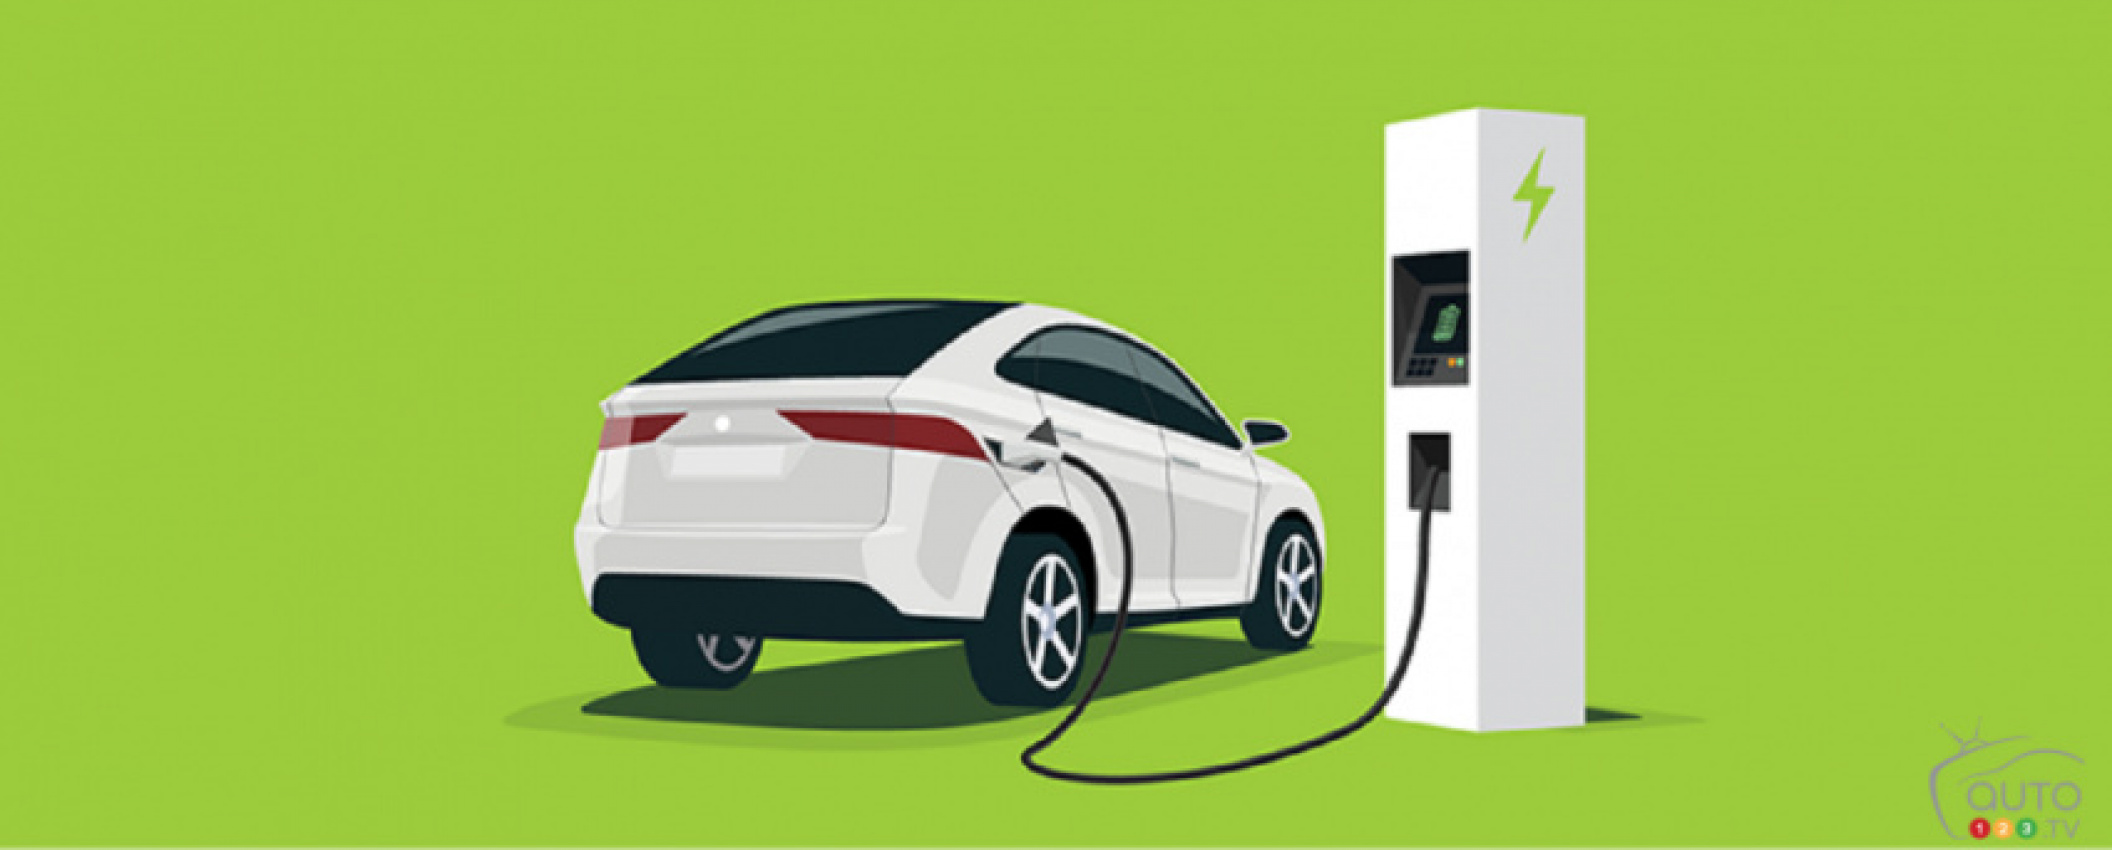 autos, cars, ram, reviews, green-wheels hub-news electric auto123 green-wheels government-of-canada canada rabais, izev incentives program expanded to include more – and more expensive – zero-emission vehicles